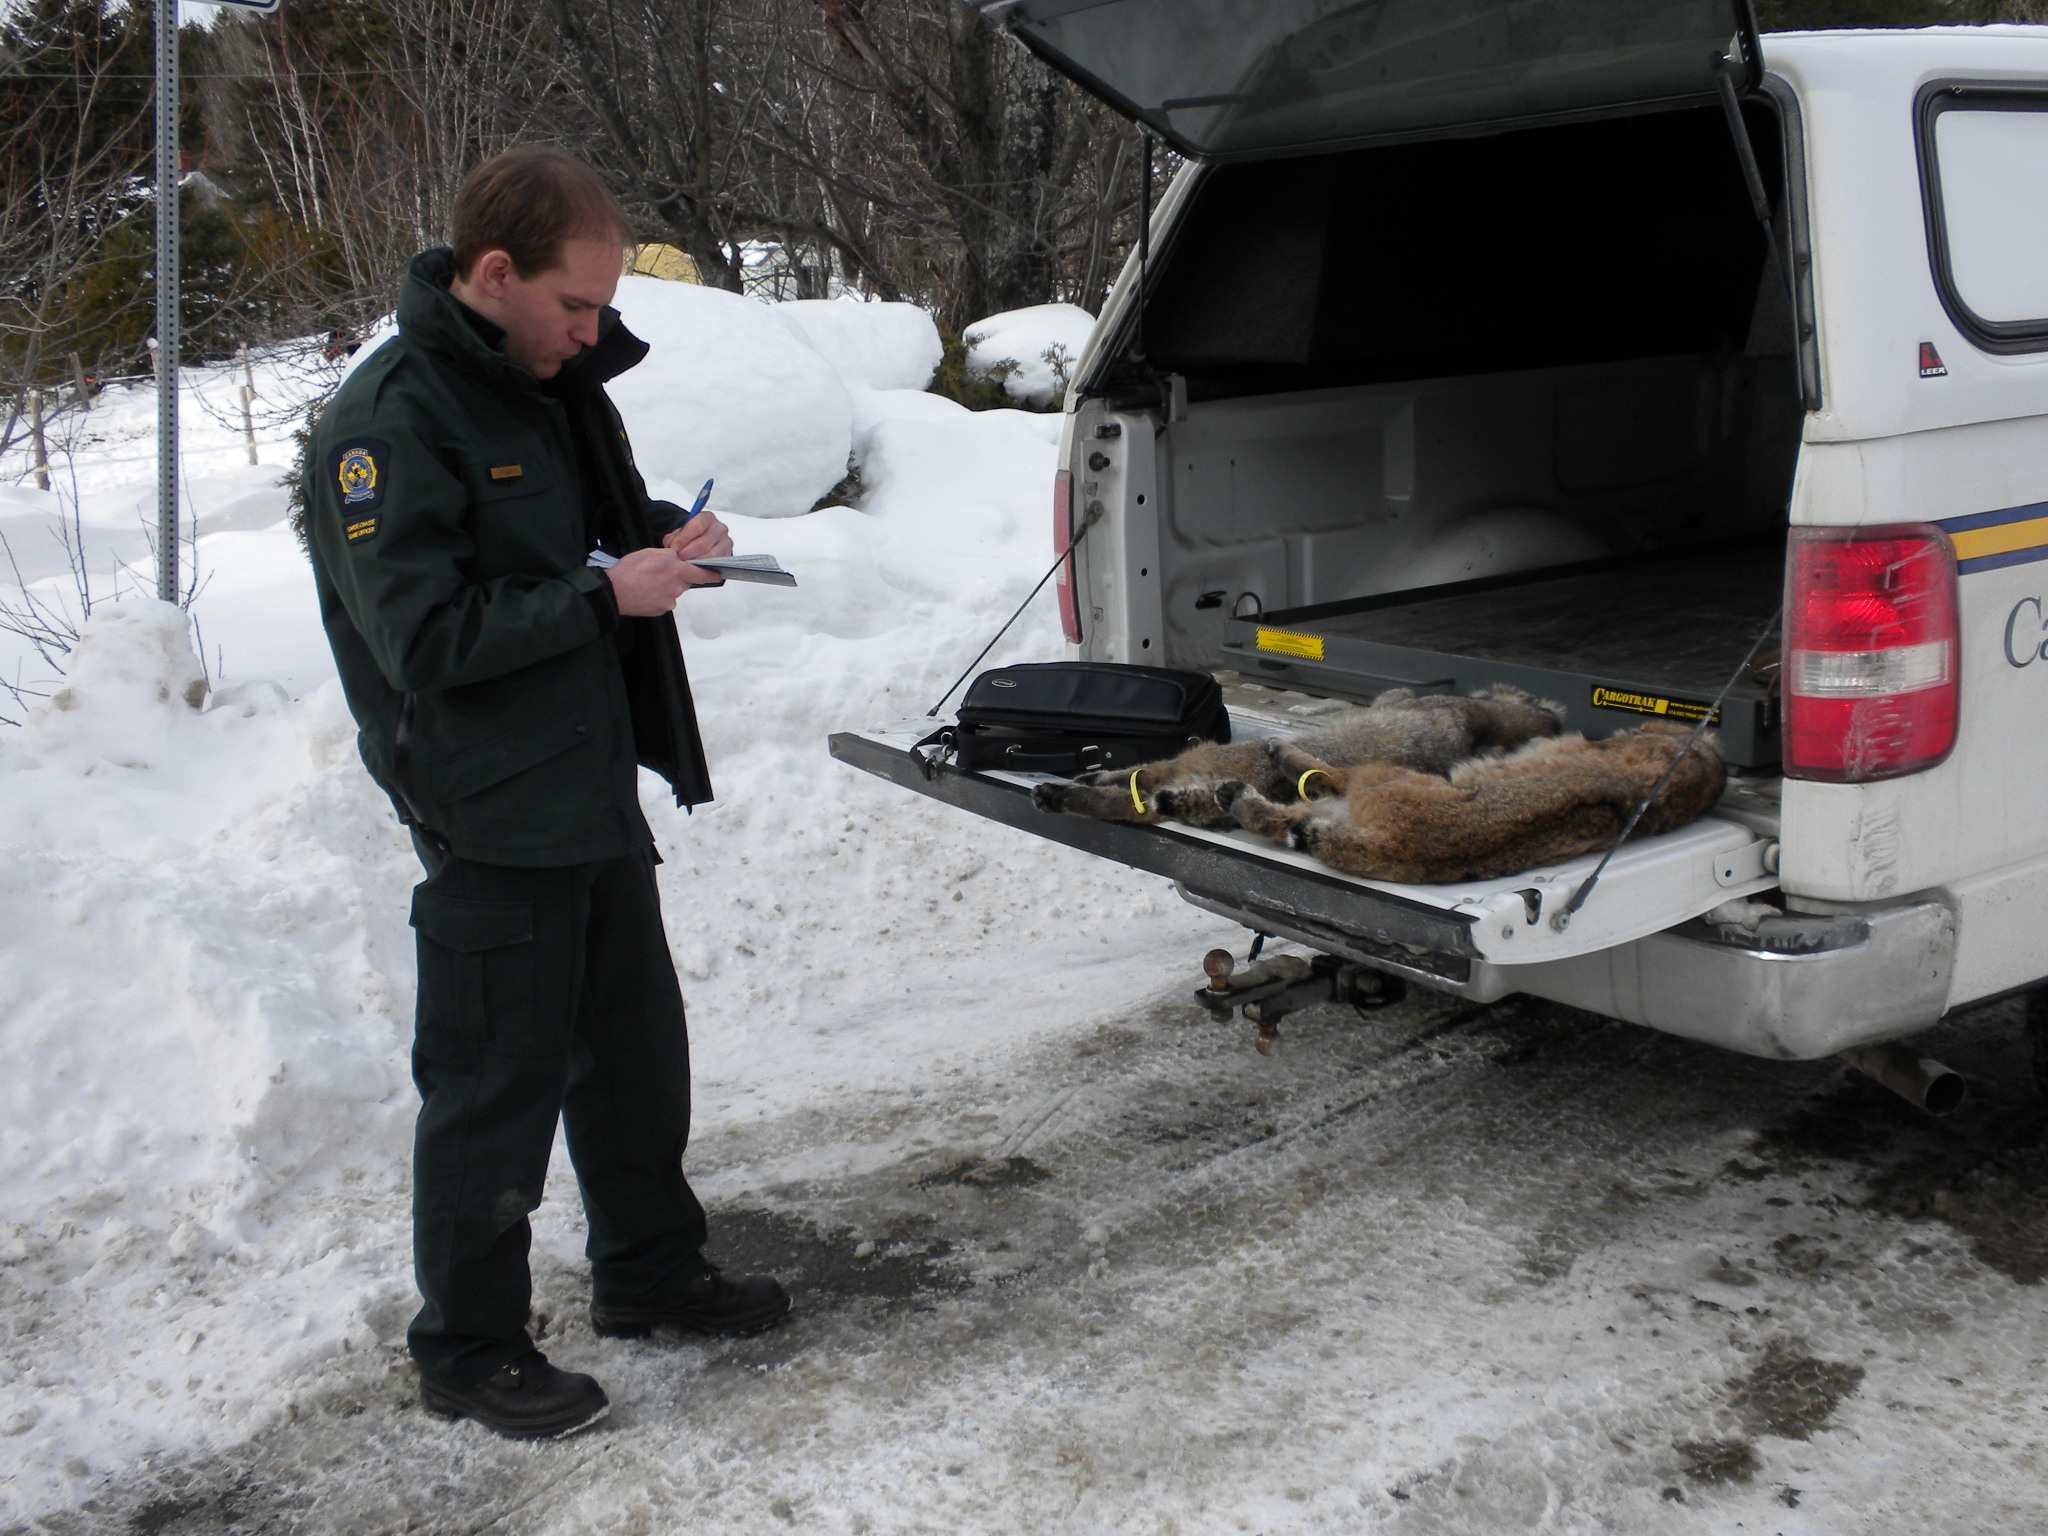 Wildlife officer during an investigation on bobcats without required CITES permits